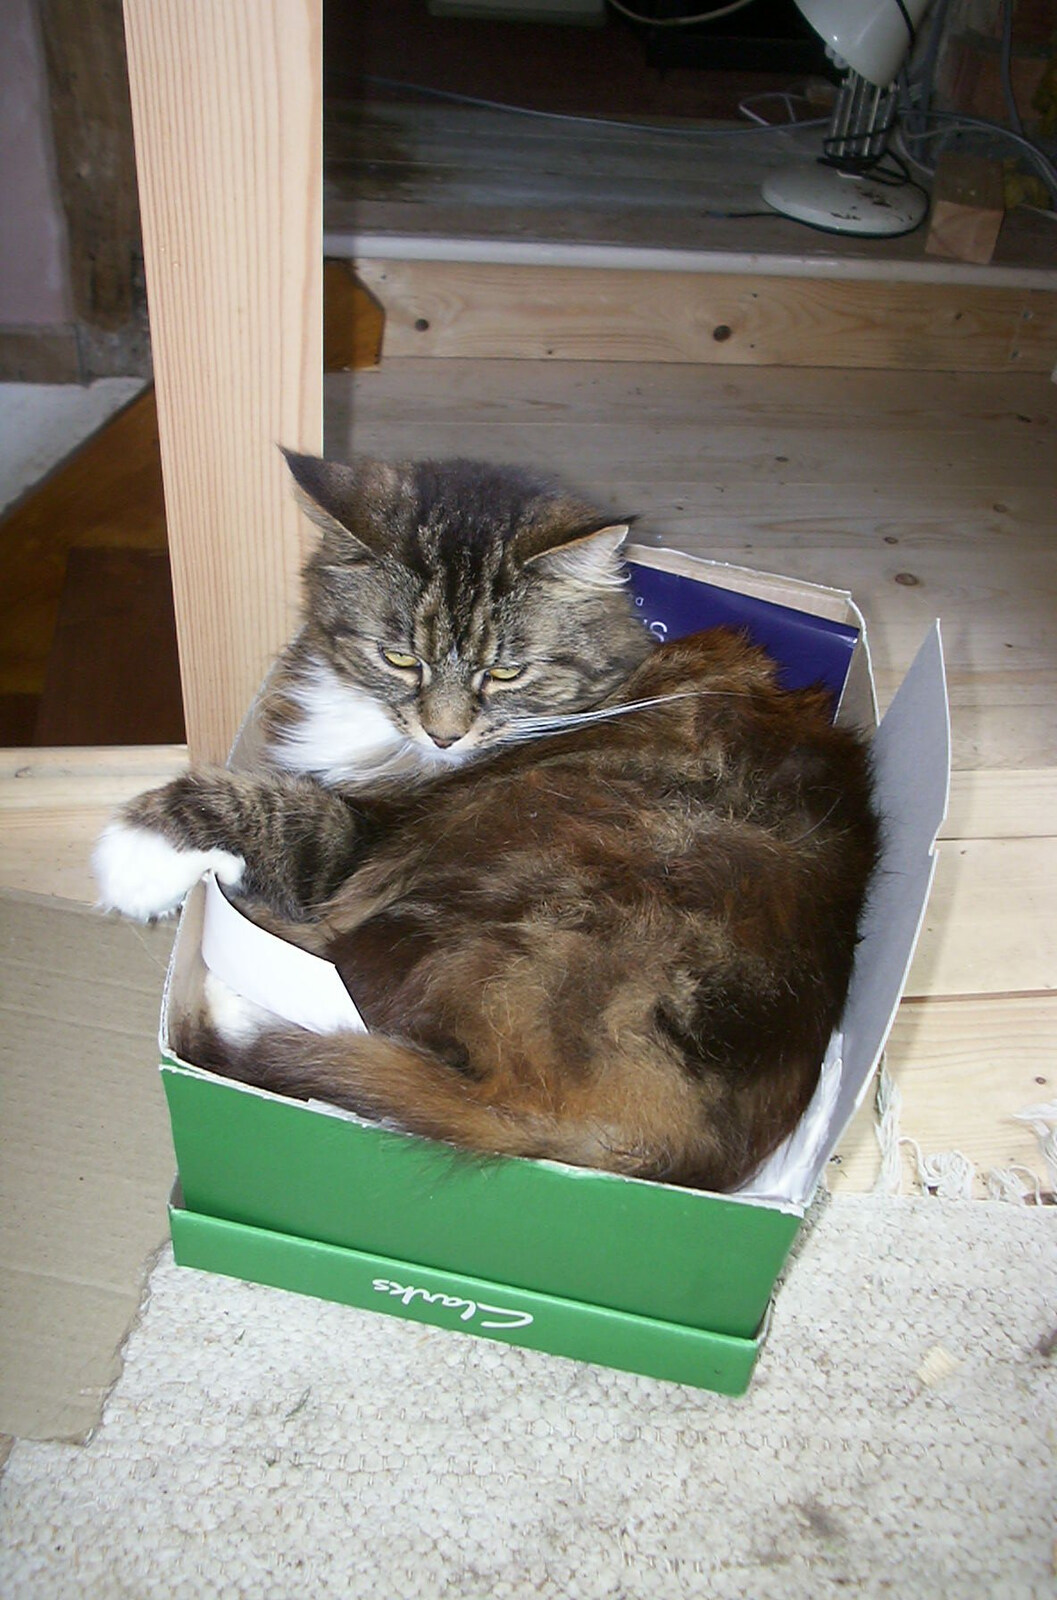 Spammy's Barbeque and A Summer Miscellany - 1st June 2002: Sophie in a box